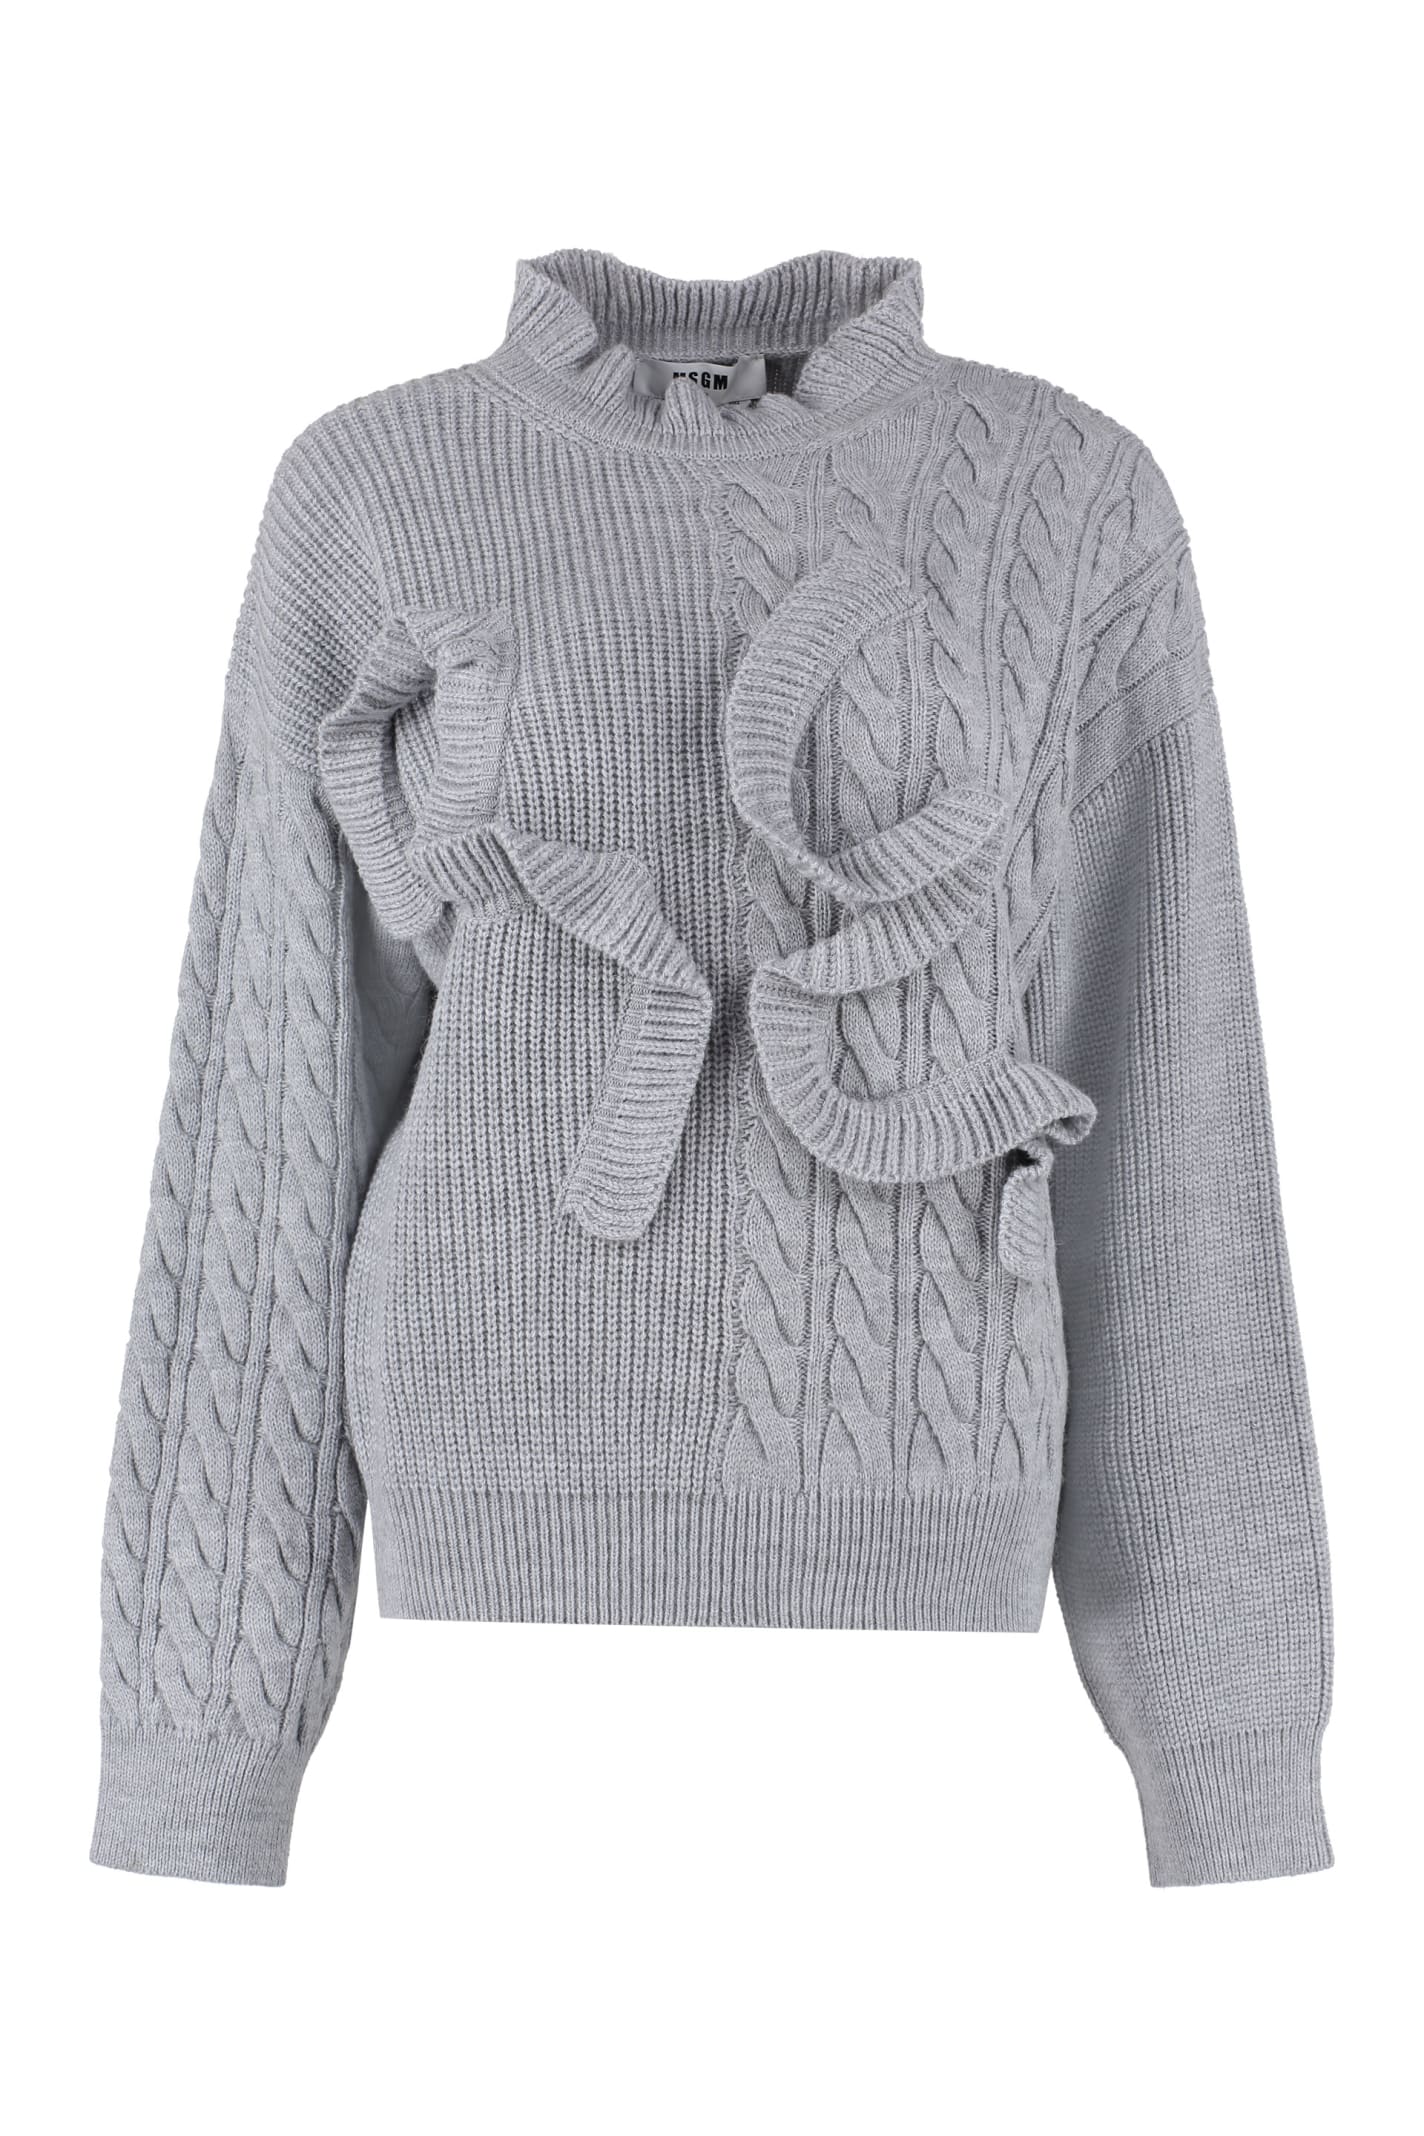 MSGM Frilled Wool-blend Sweater